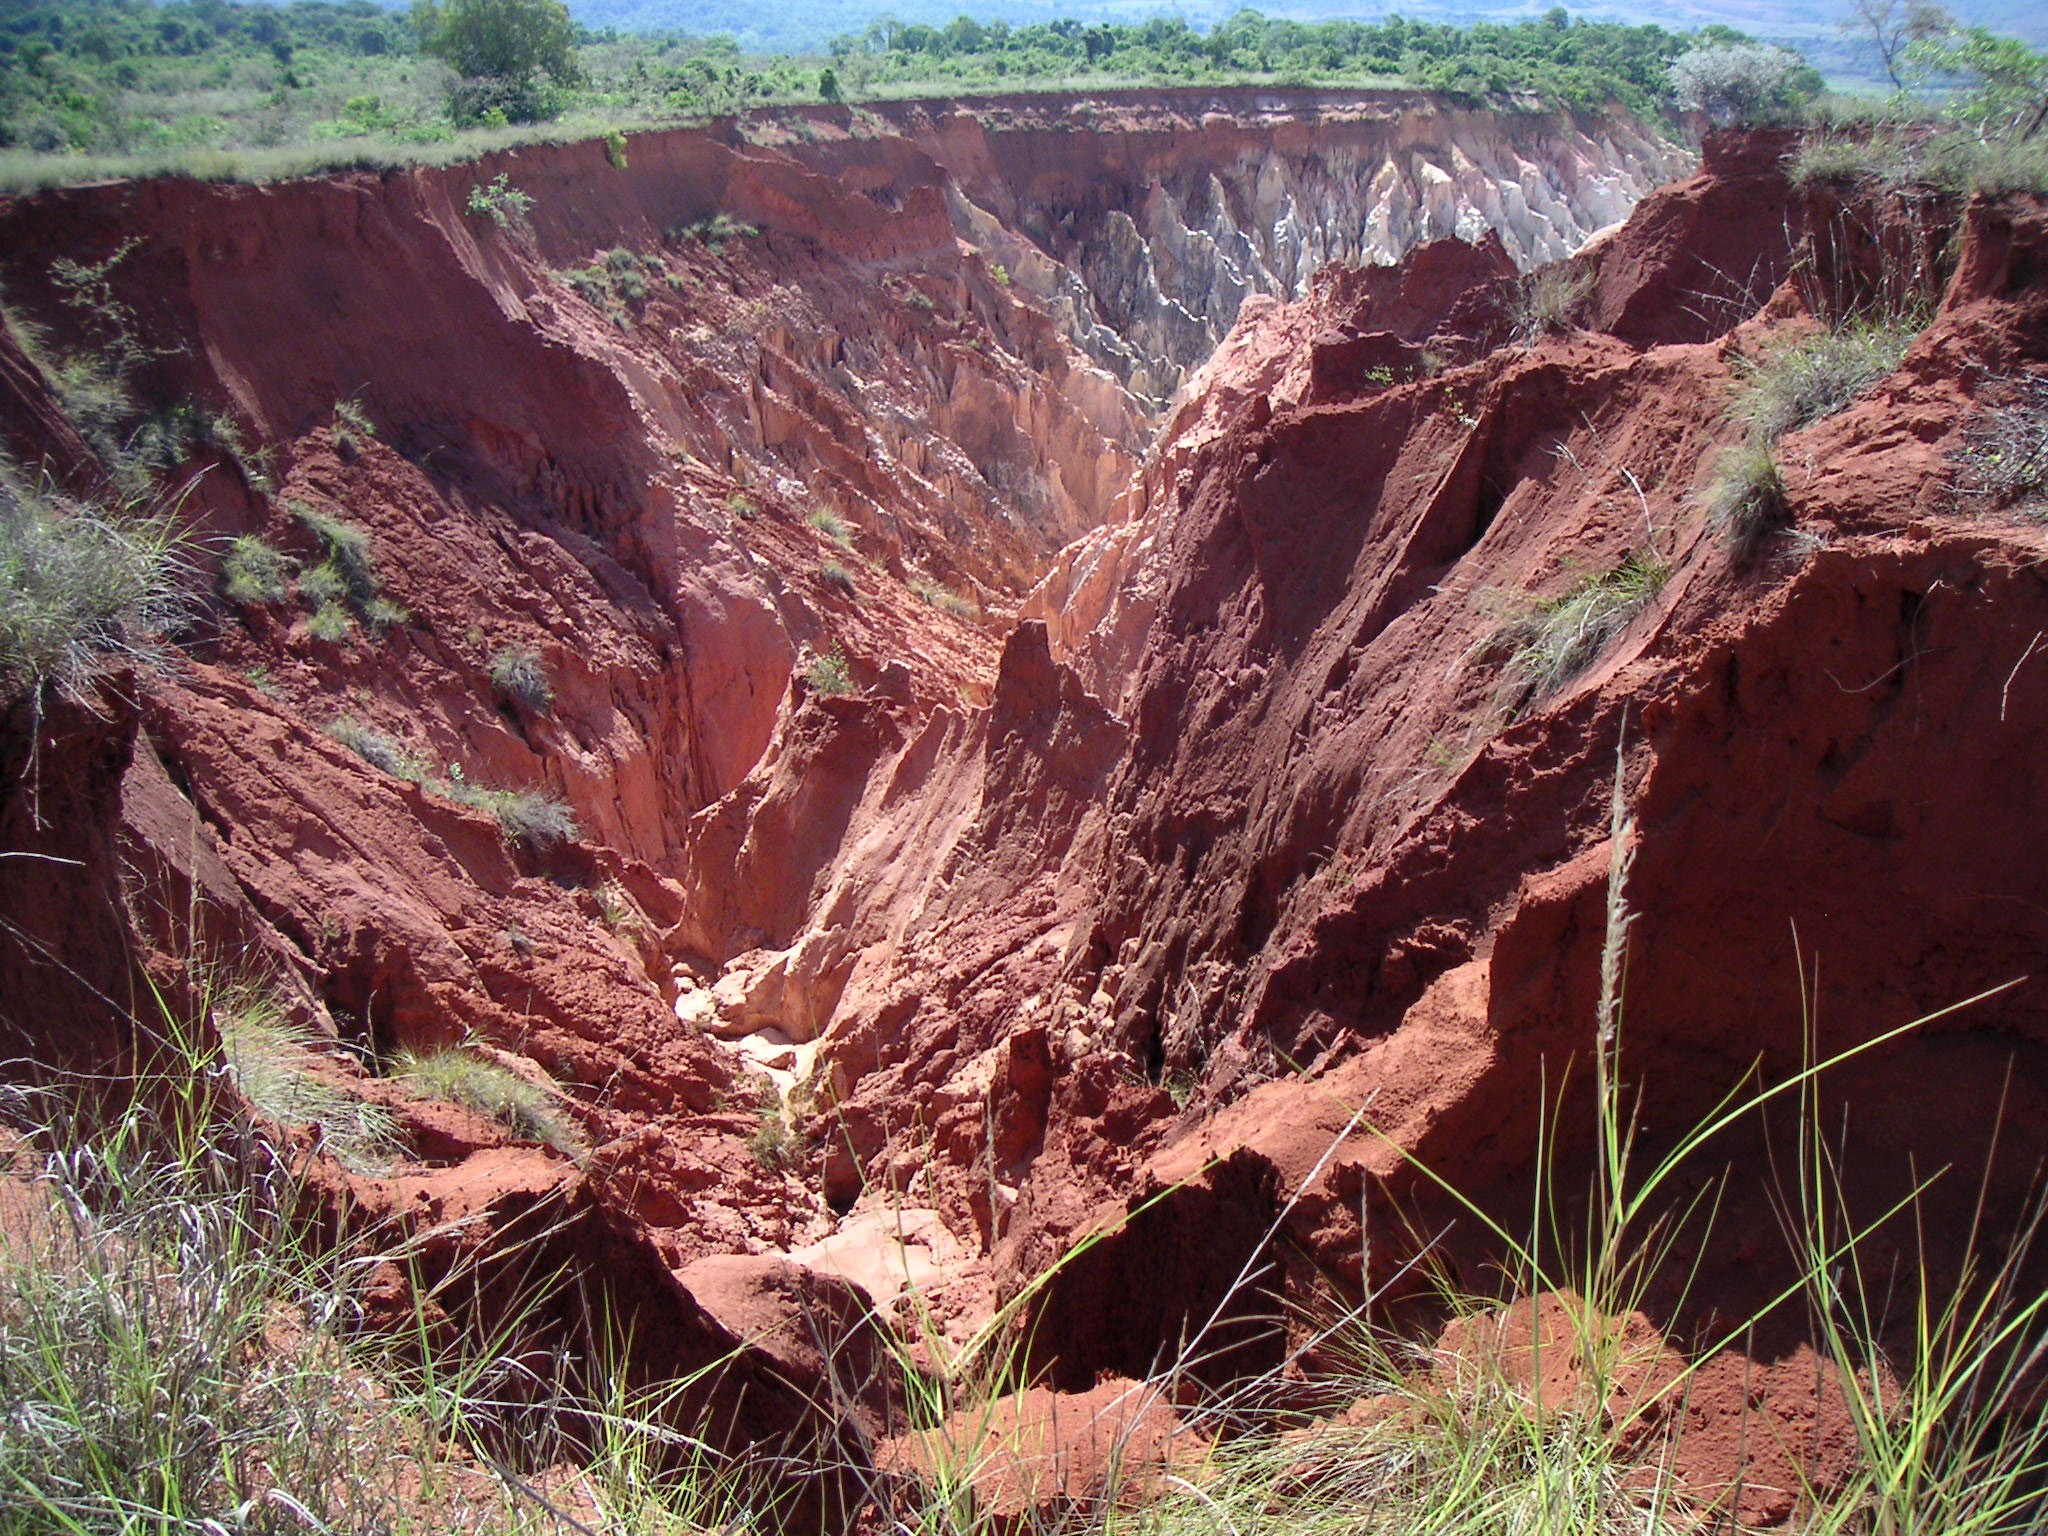 In Madagaskar the soil erosion due colonial deforestation leaves a gaping wound.